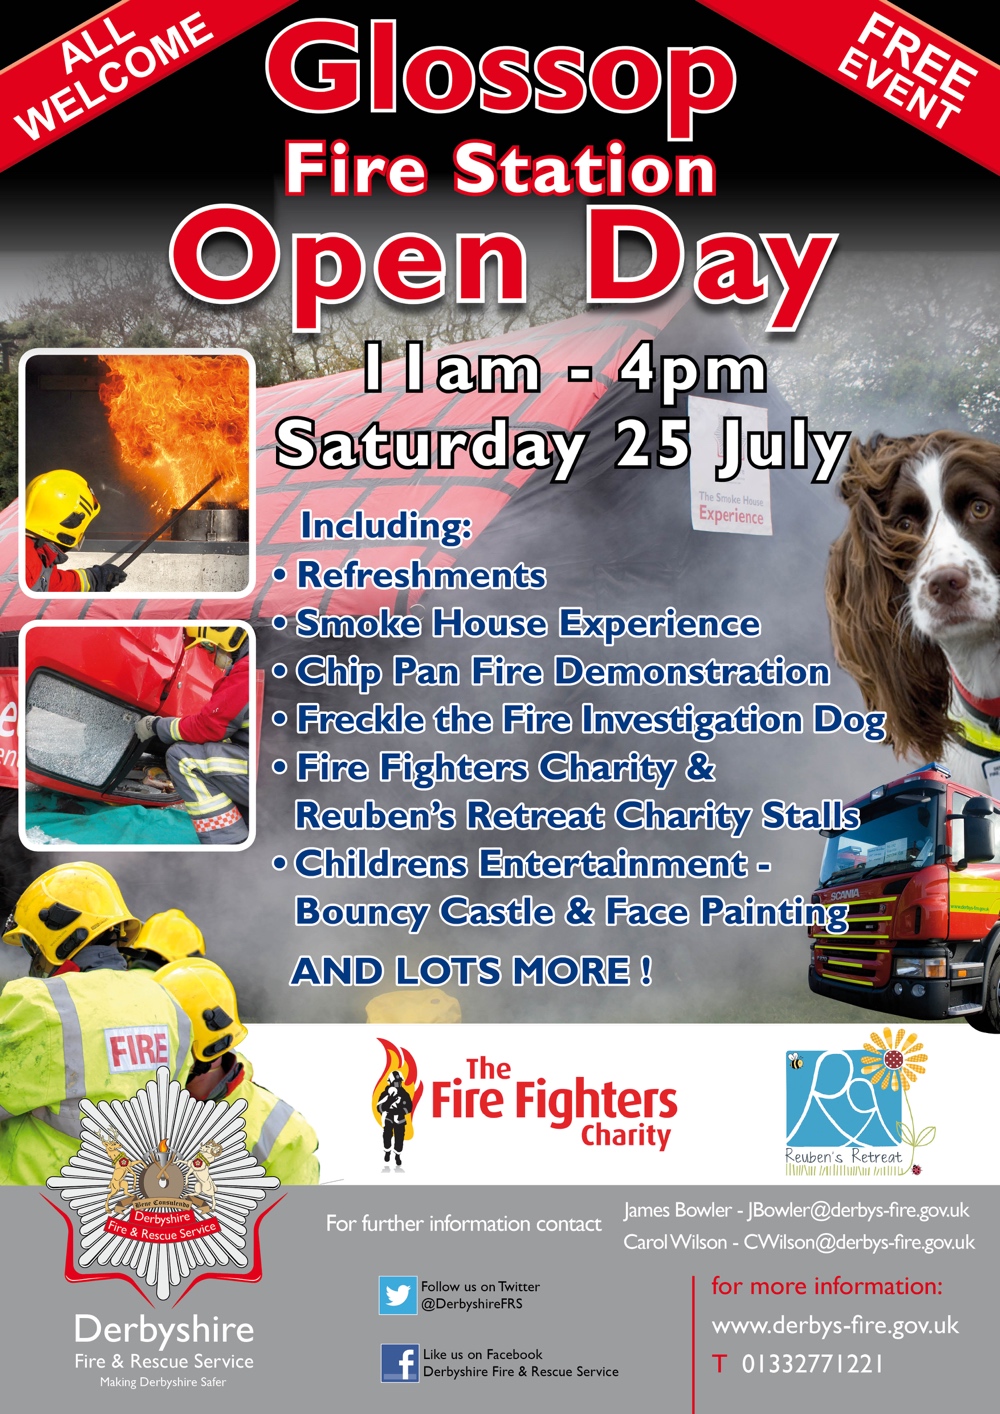 Something for the weekend – Glossop Fire Station Open Day